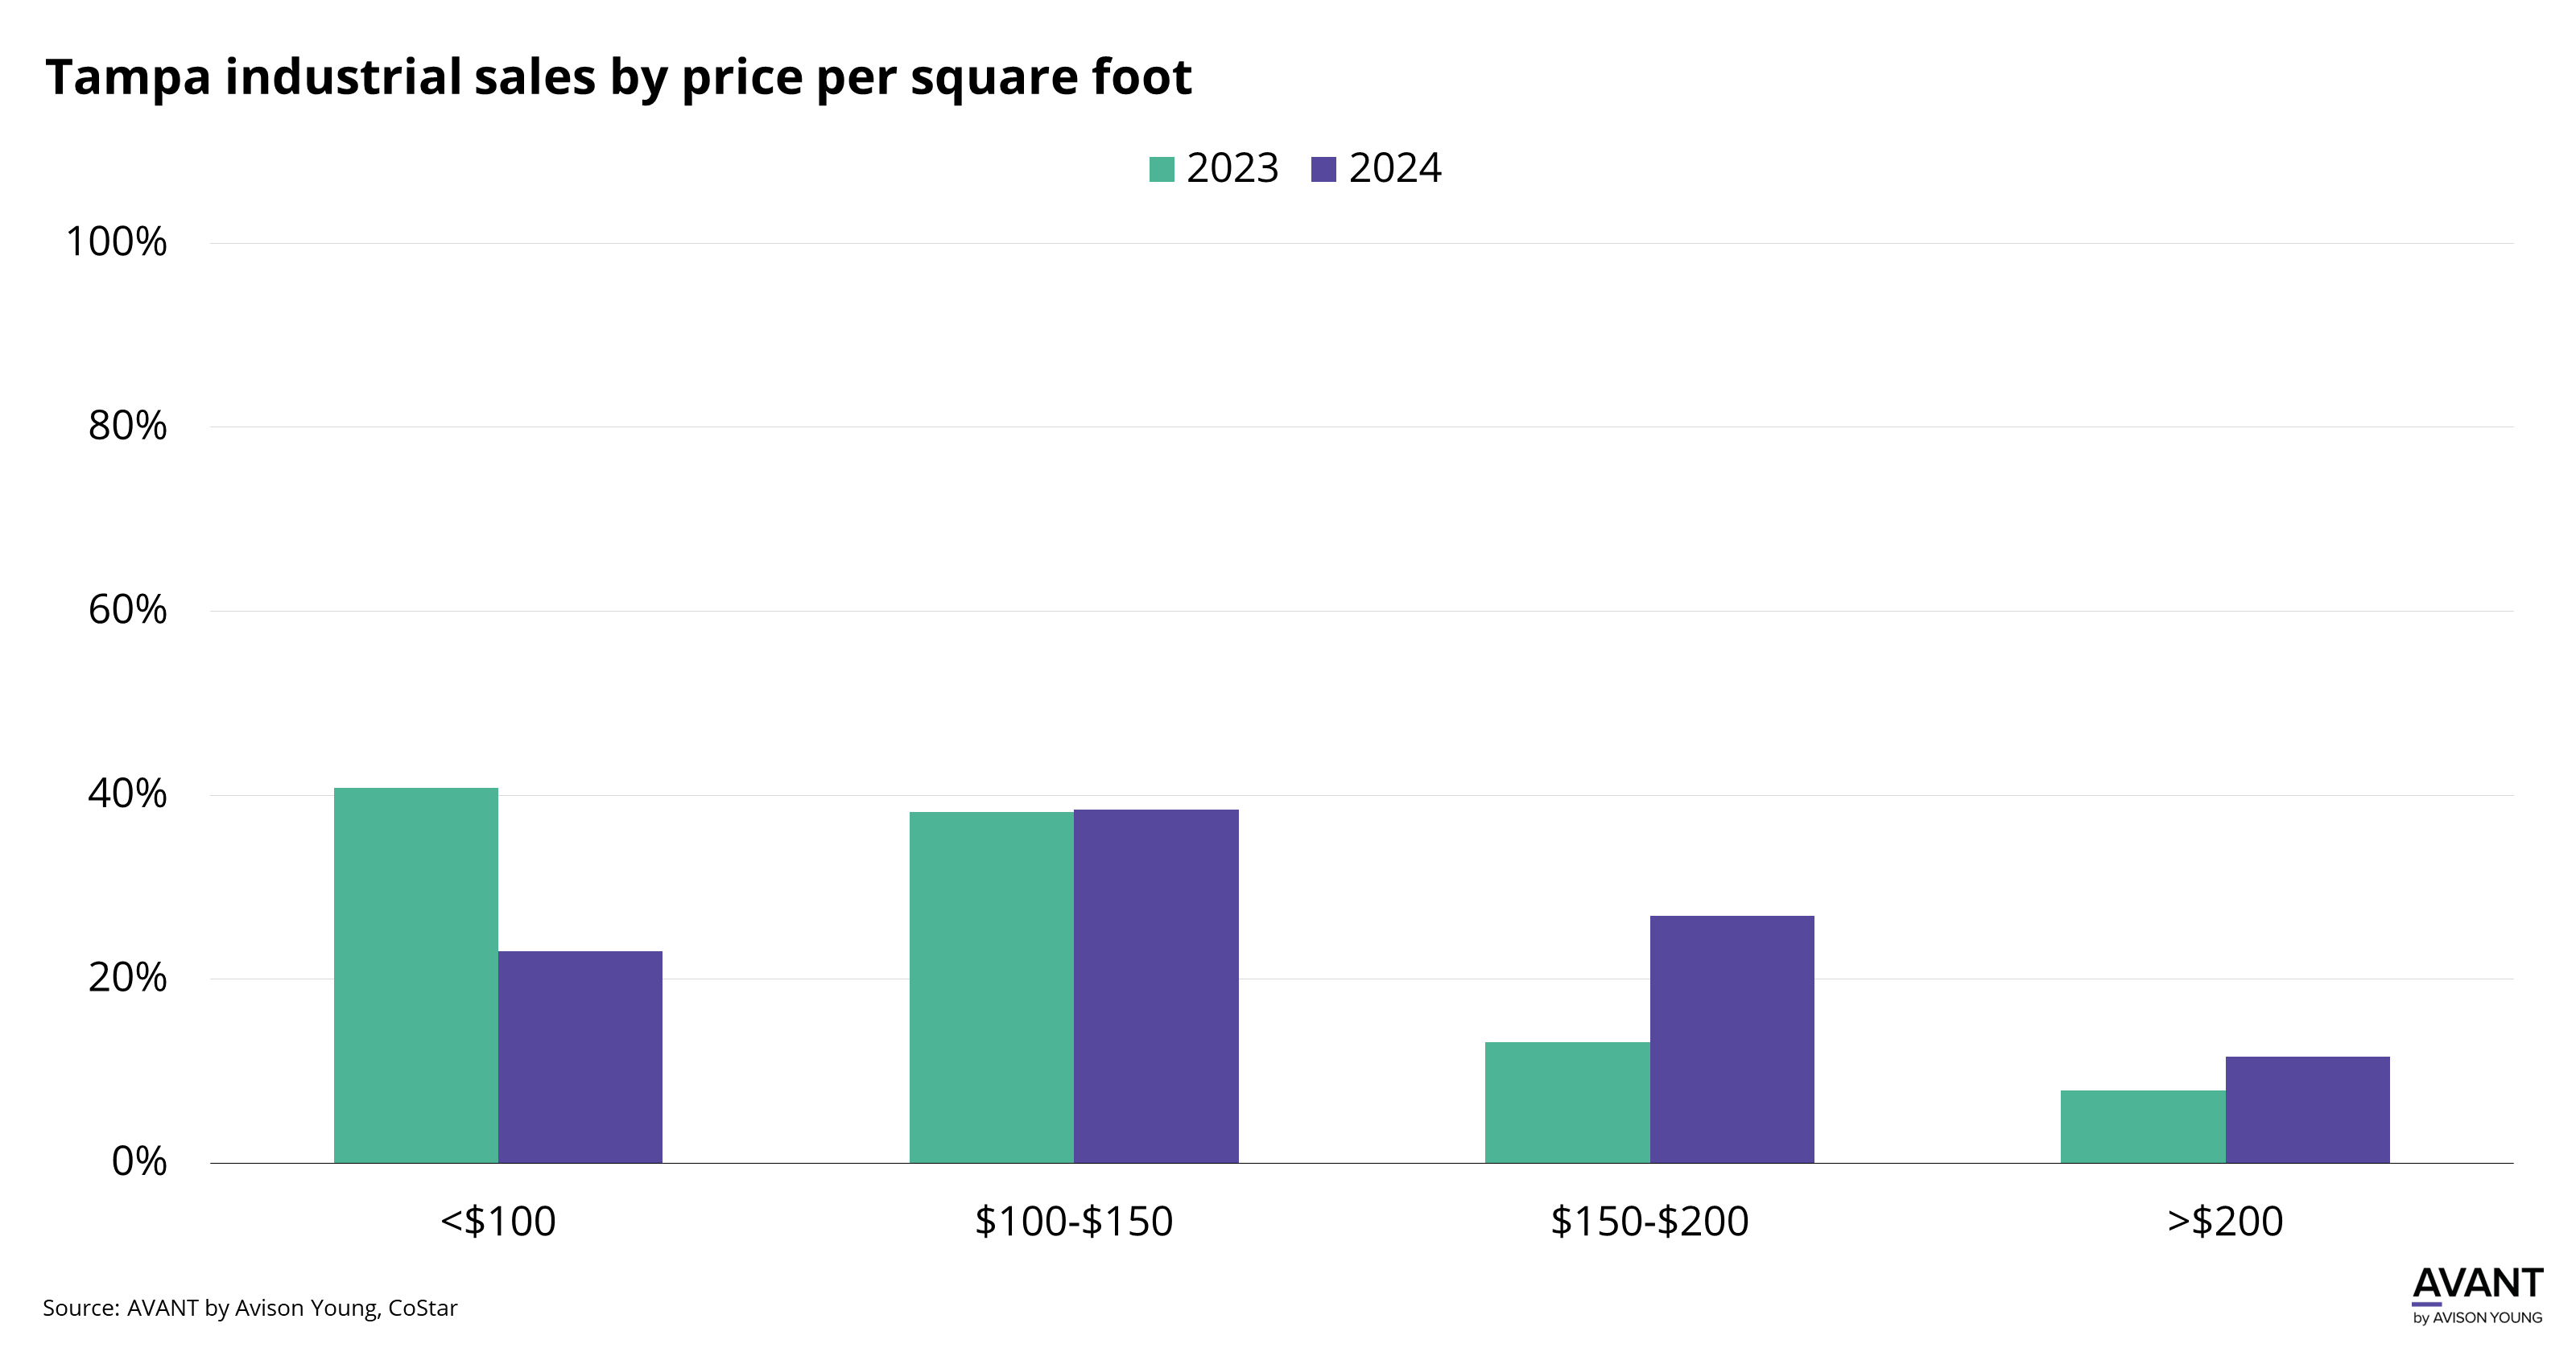 graph of Tampa's industrial sales by price per square foot in 2023 compared to 2024